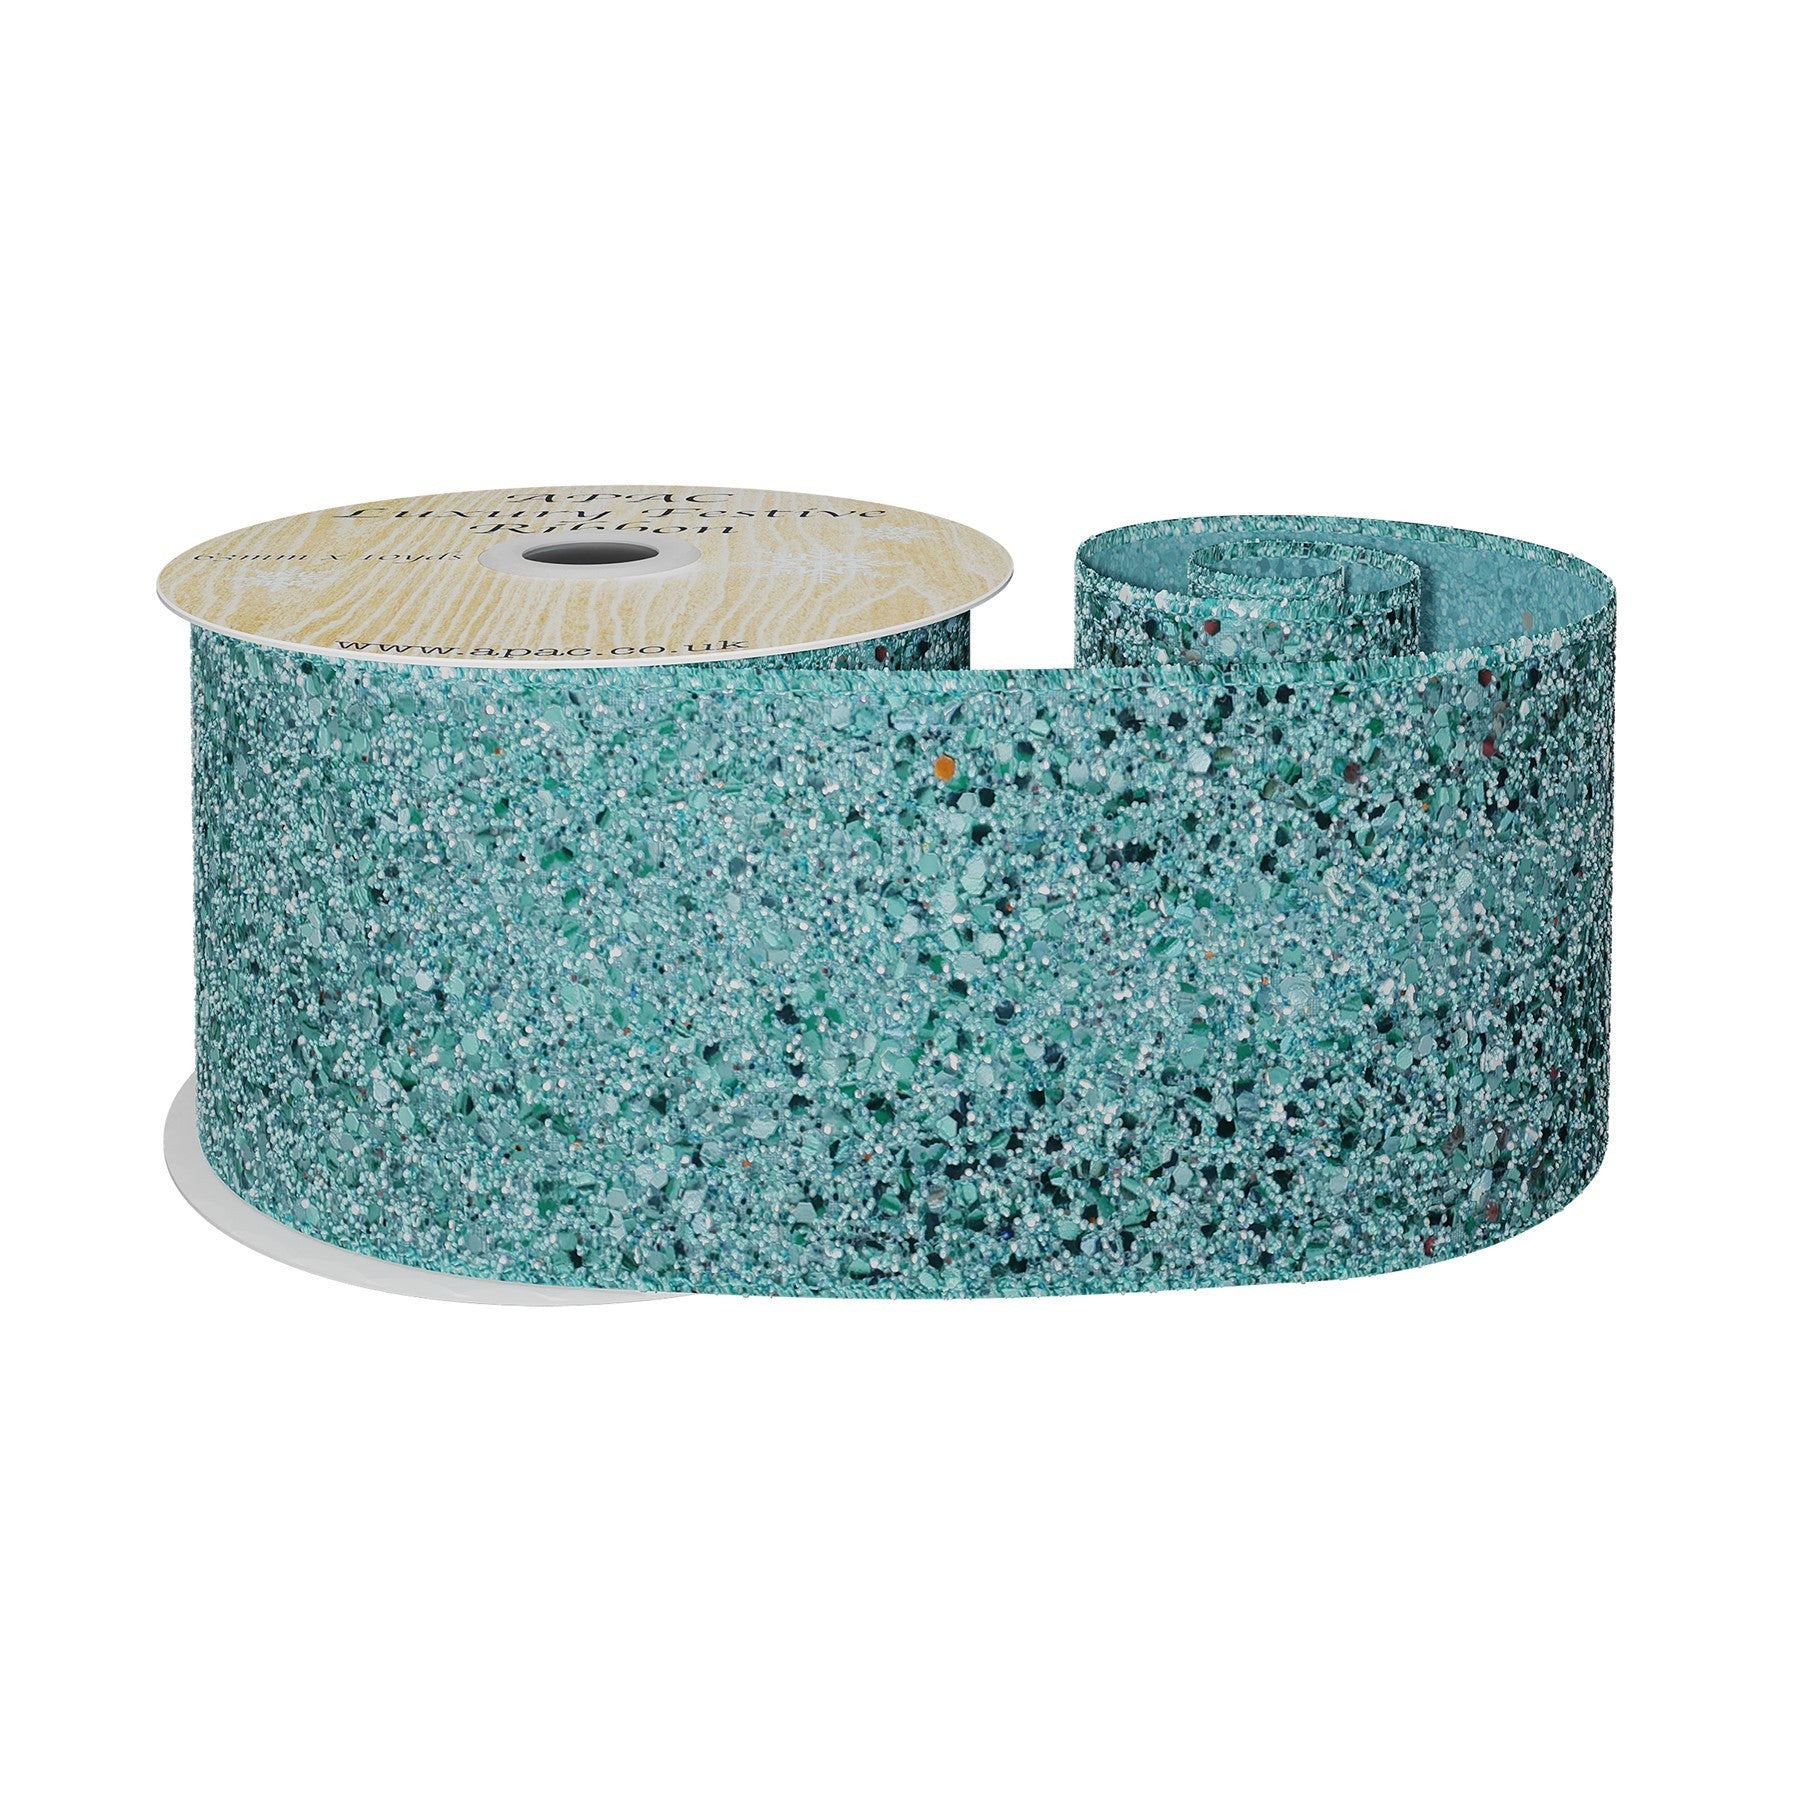 View Mint Glitter Wired Ribbon 63mm x 10 yards information